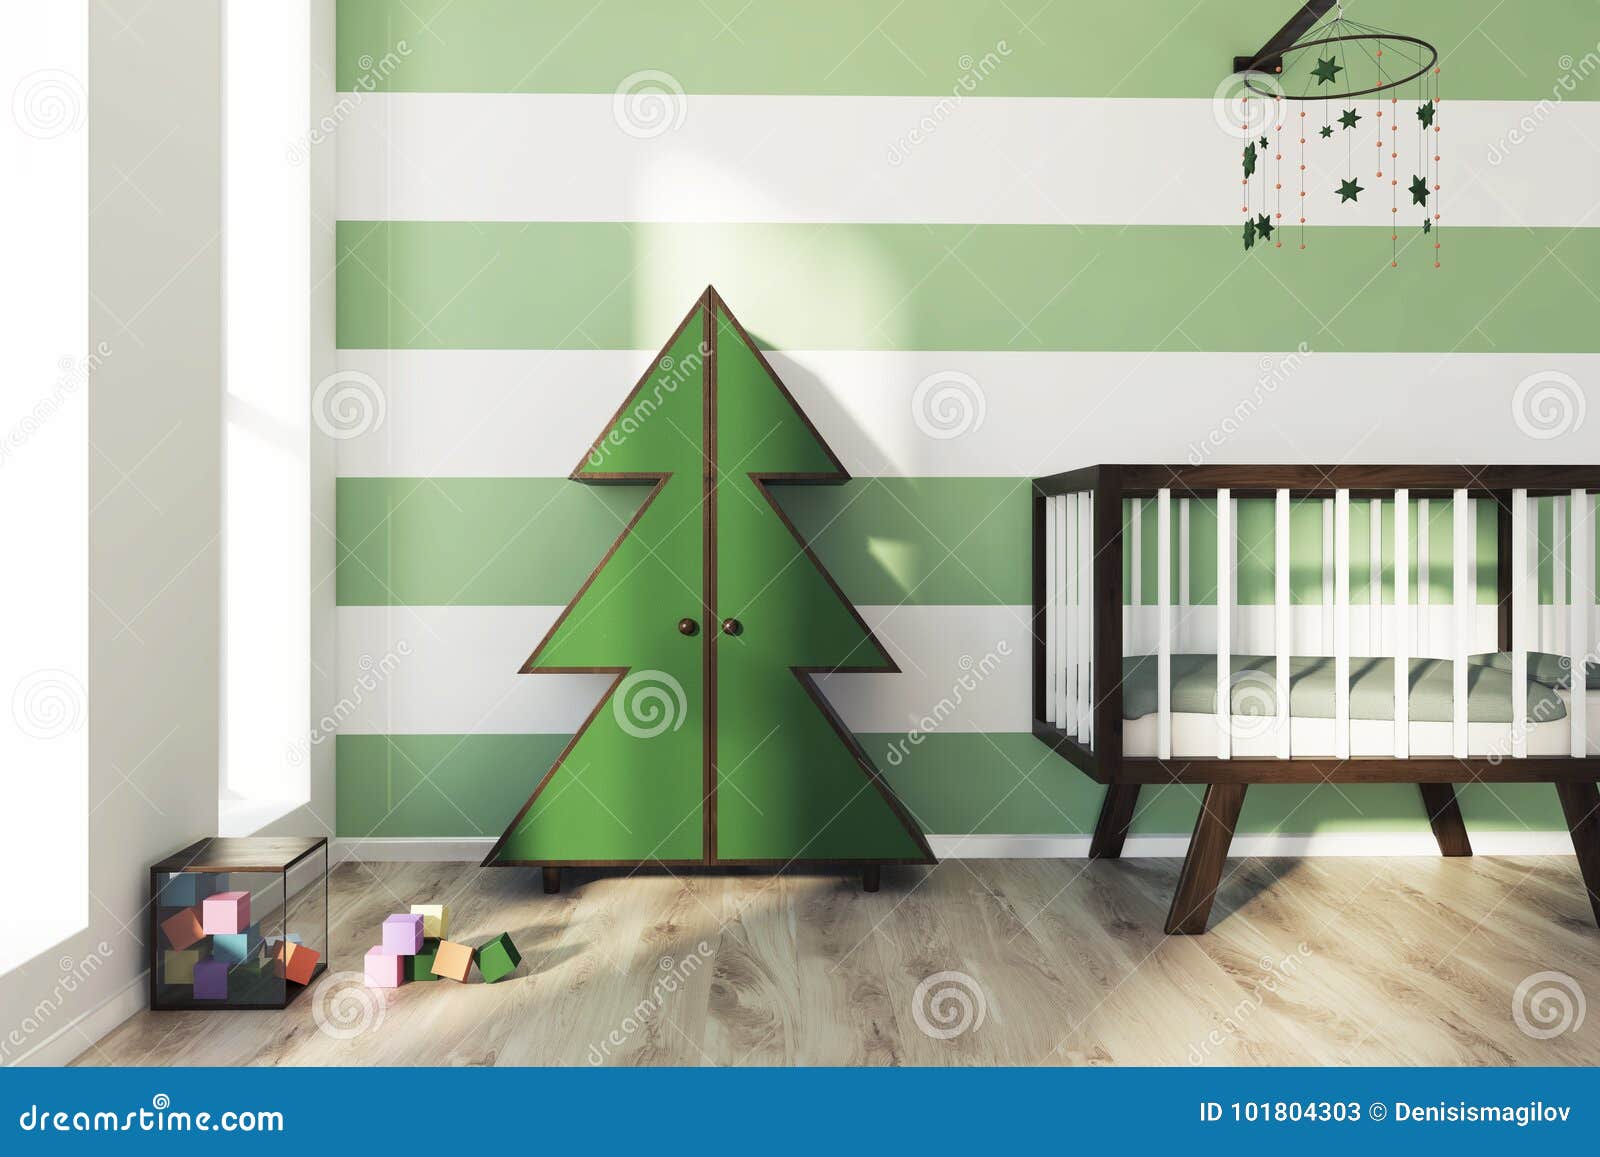 Green And White Nursery Crib And Fur Tree Stock Illustration